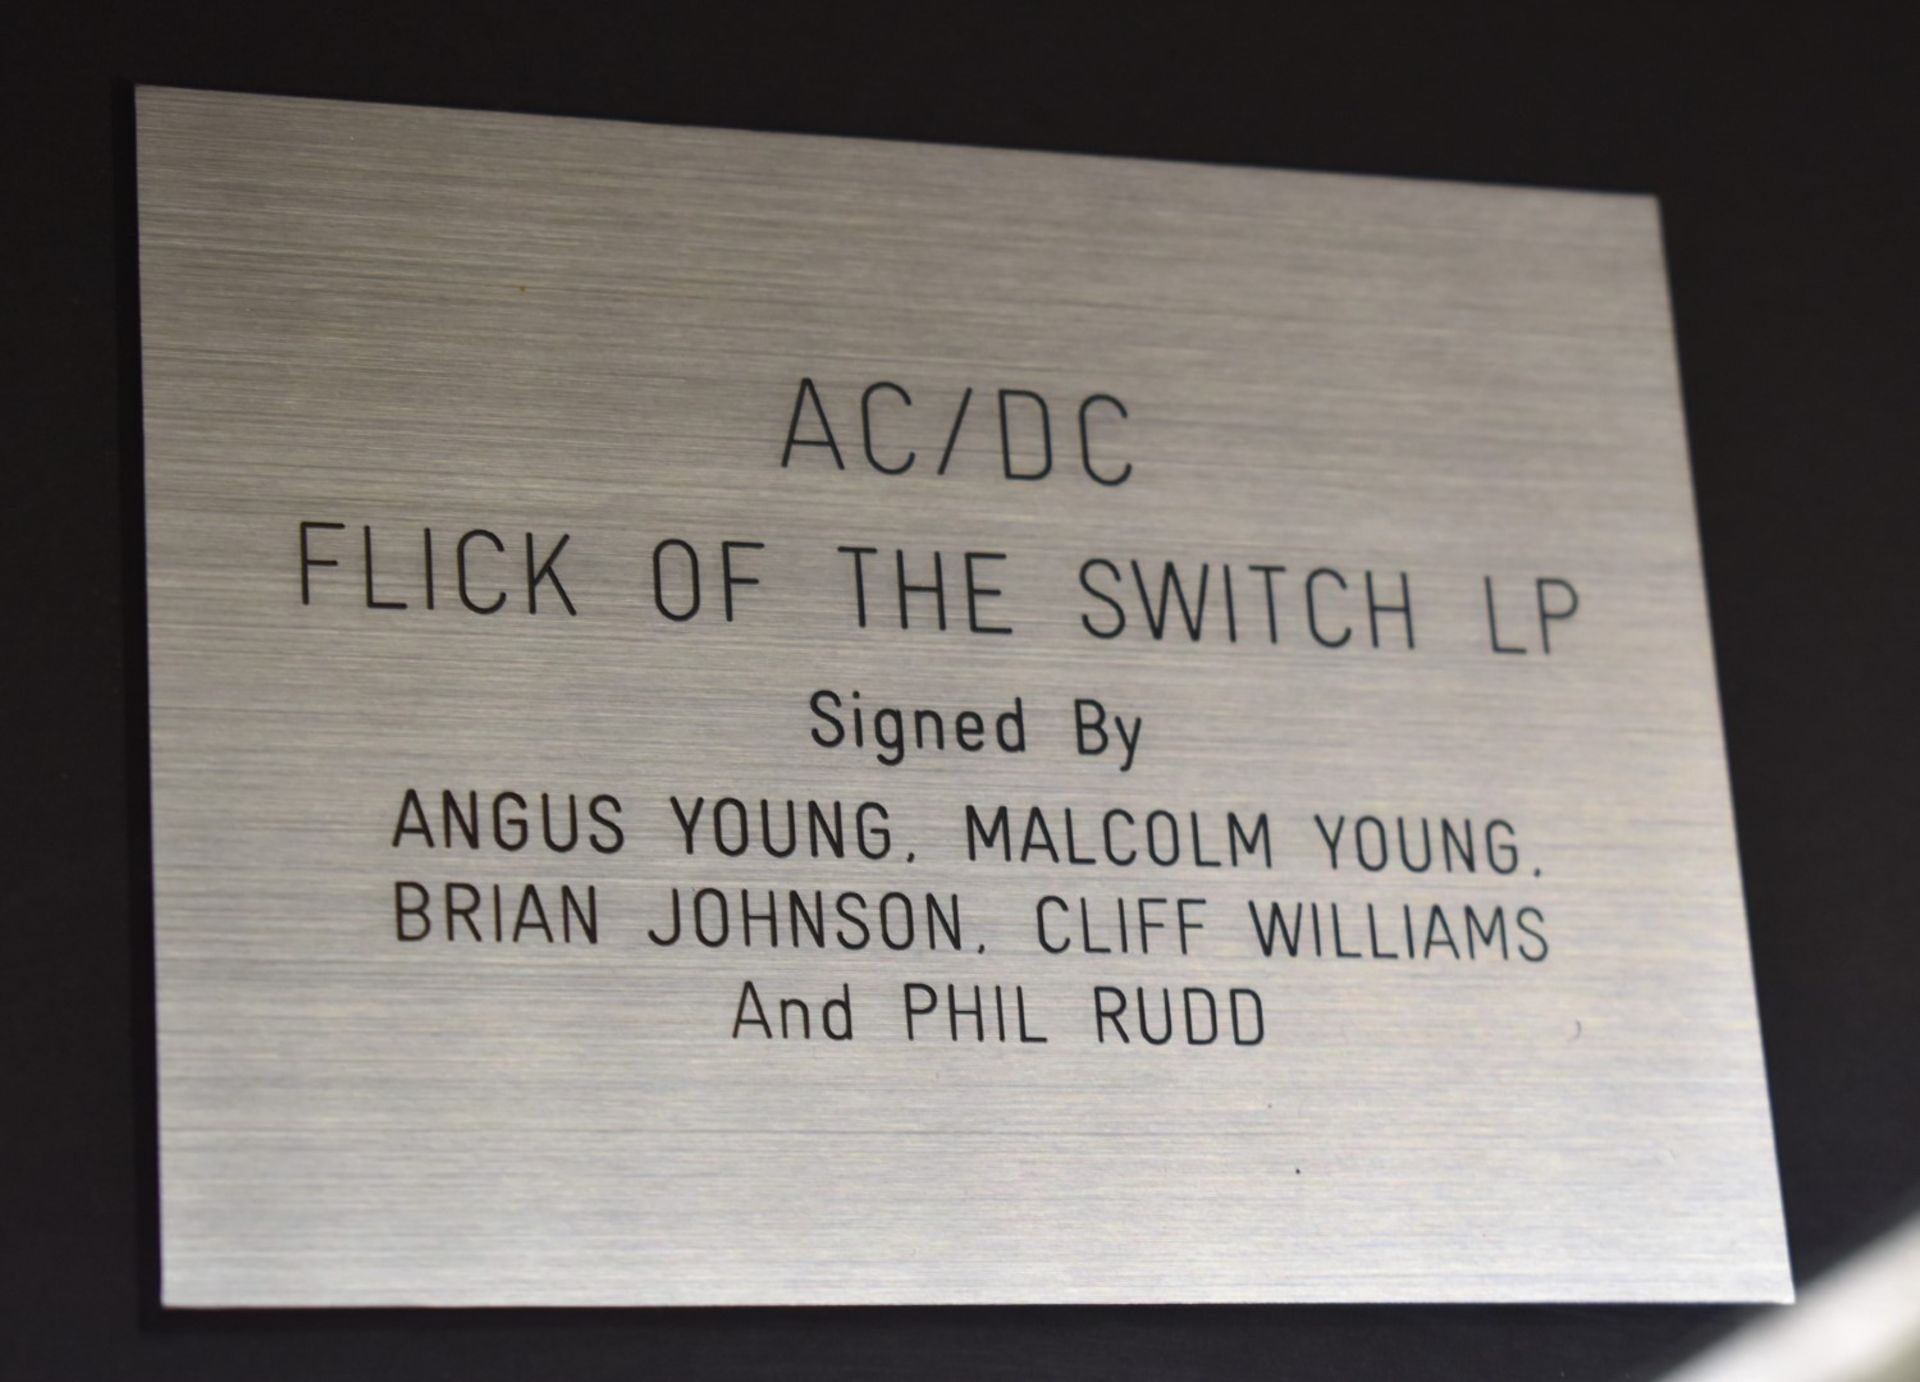 1 x Authentic AC/DC Autographs With COA - Flick of The Switch Album Cover Signed By Dave Evans, - Image 14 of 14